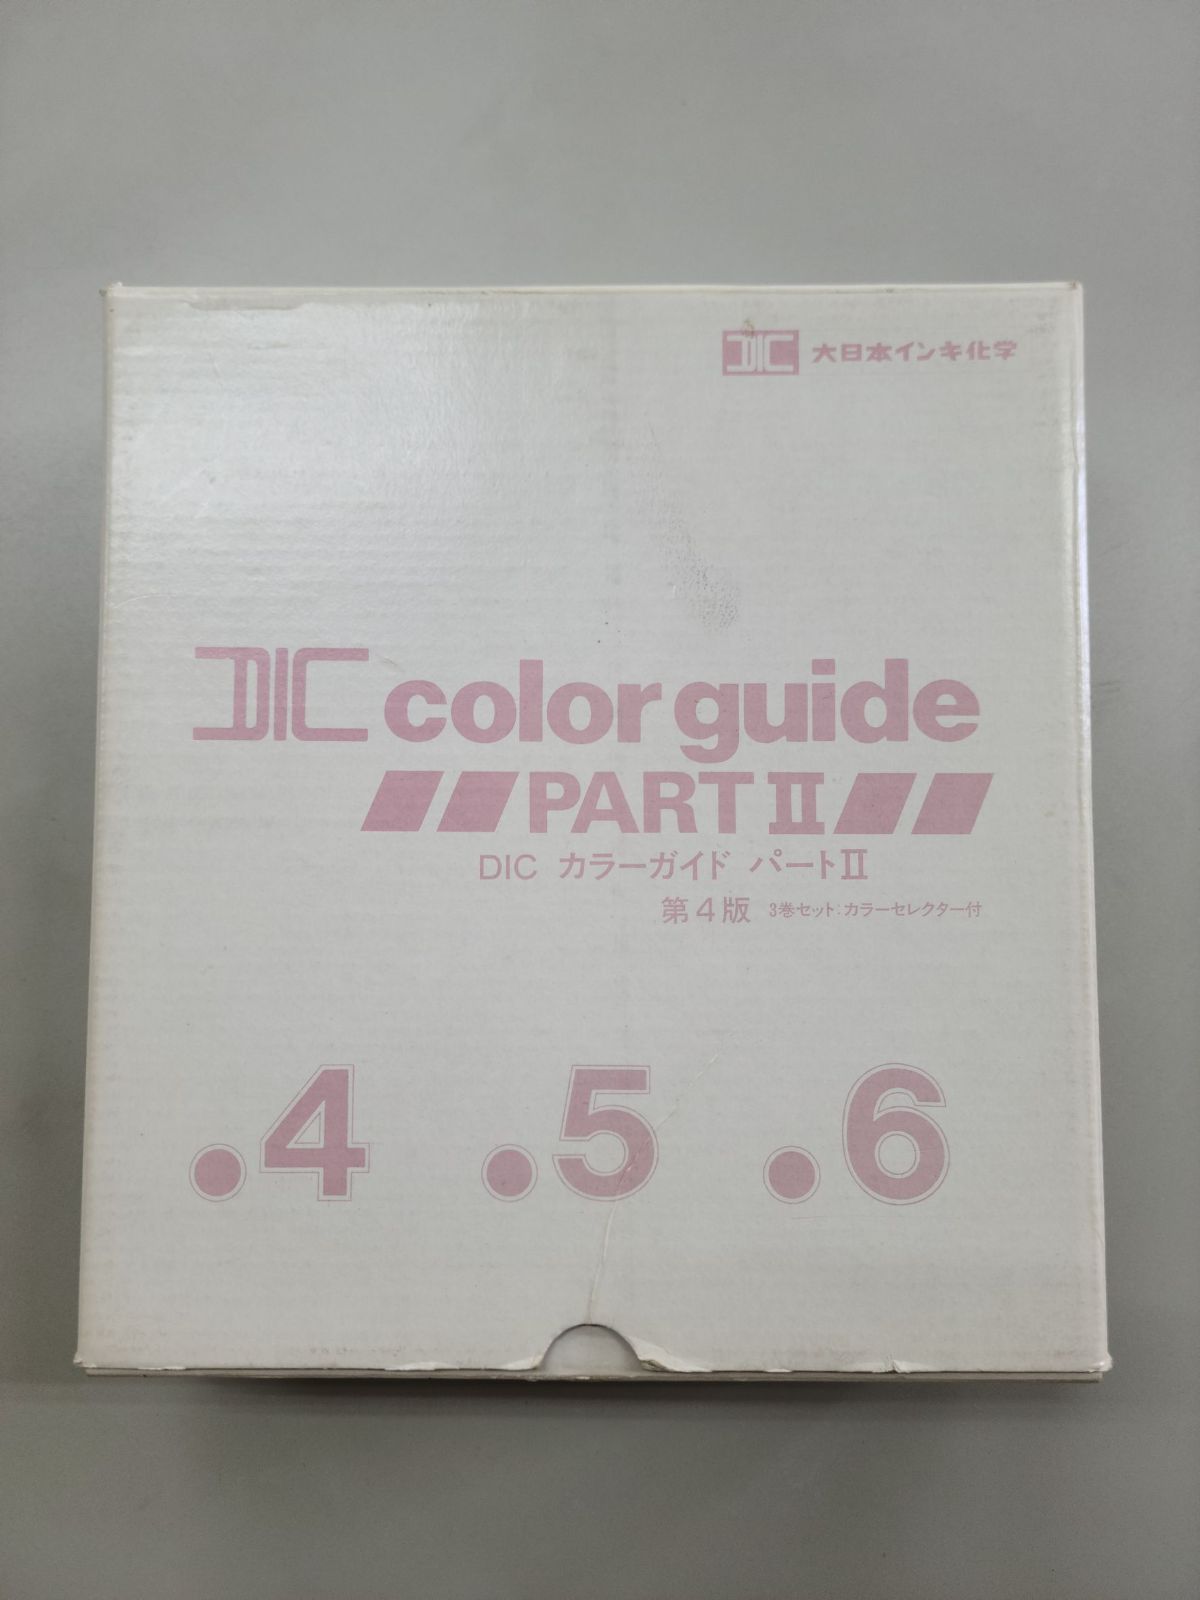 DIC カラーガイド パートⅡ 第4版 4・5・6 DIC COLOR GUIDE PARTⅡ Ver 